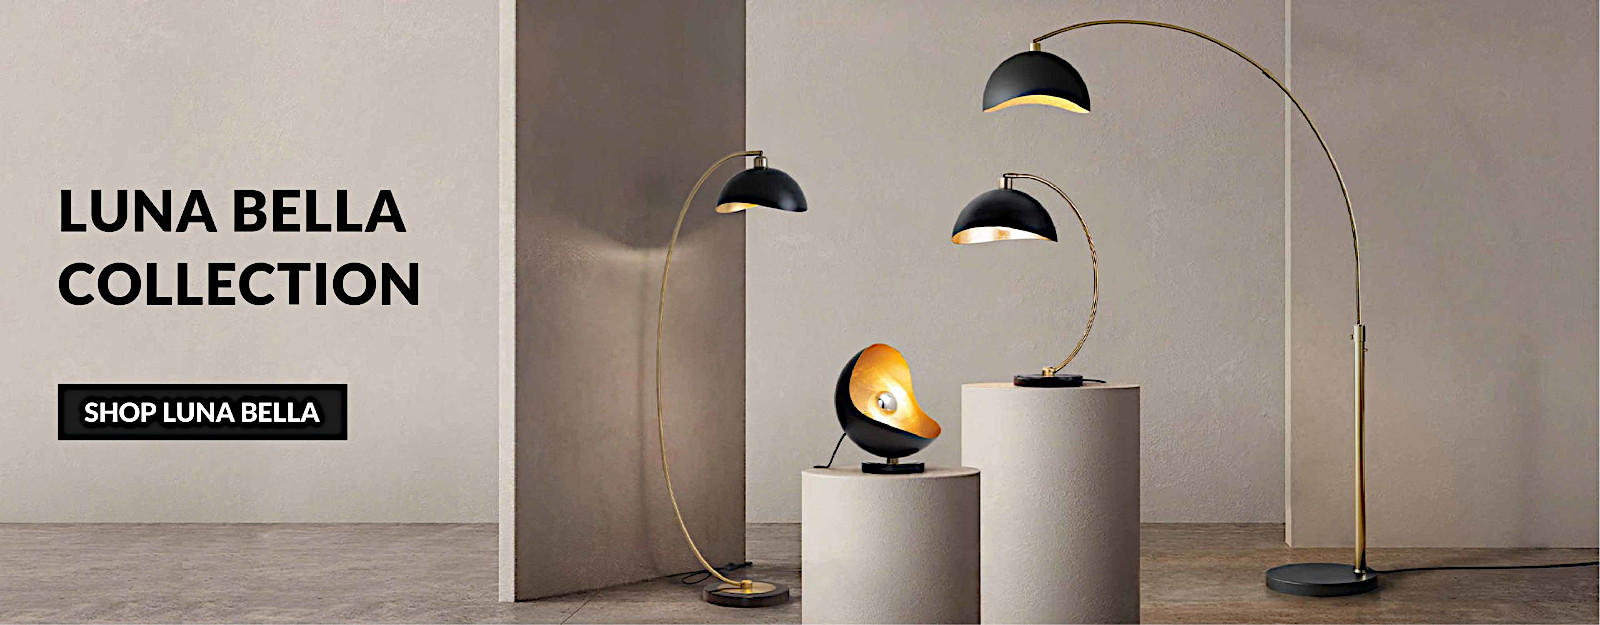 Luna Bella lighting collection popularly priced